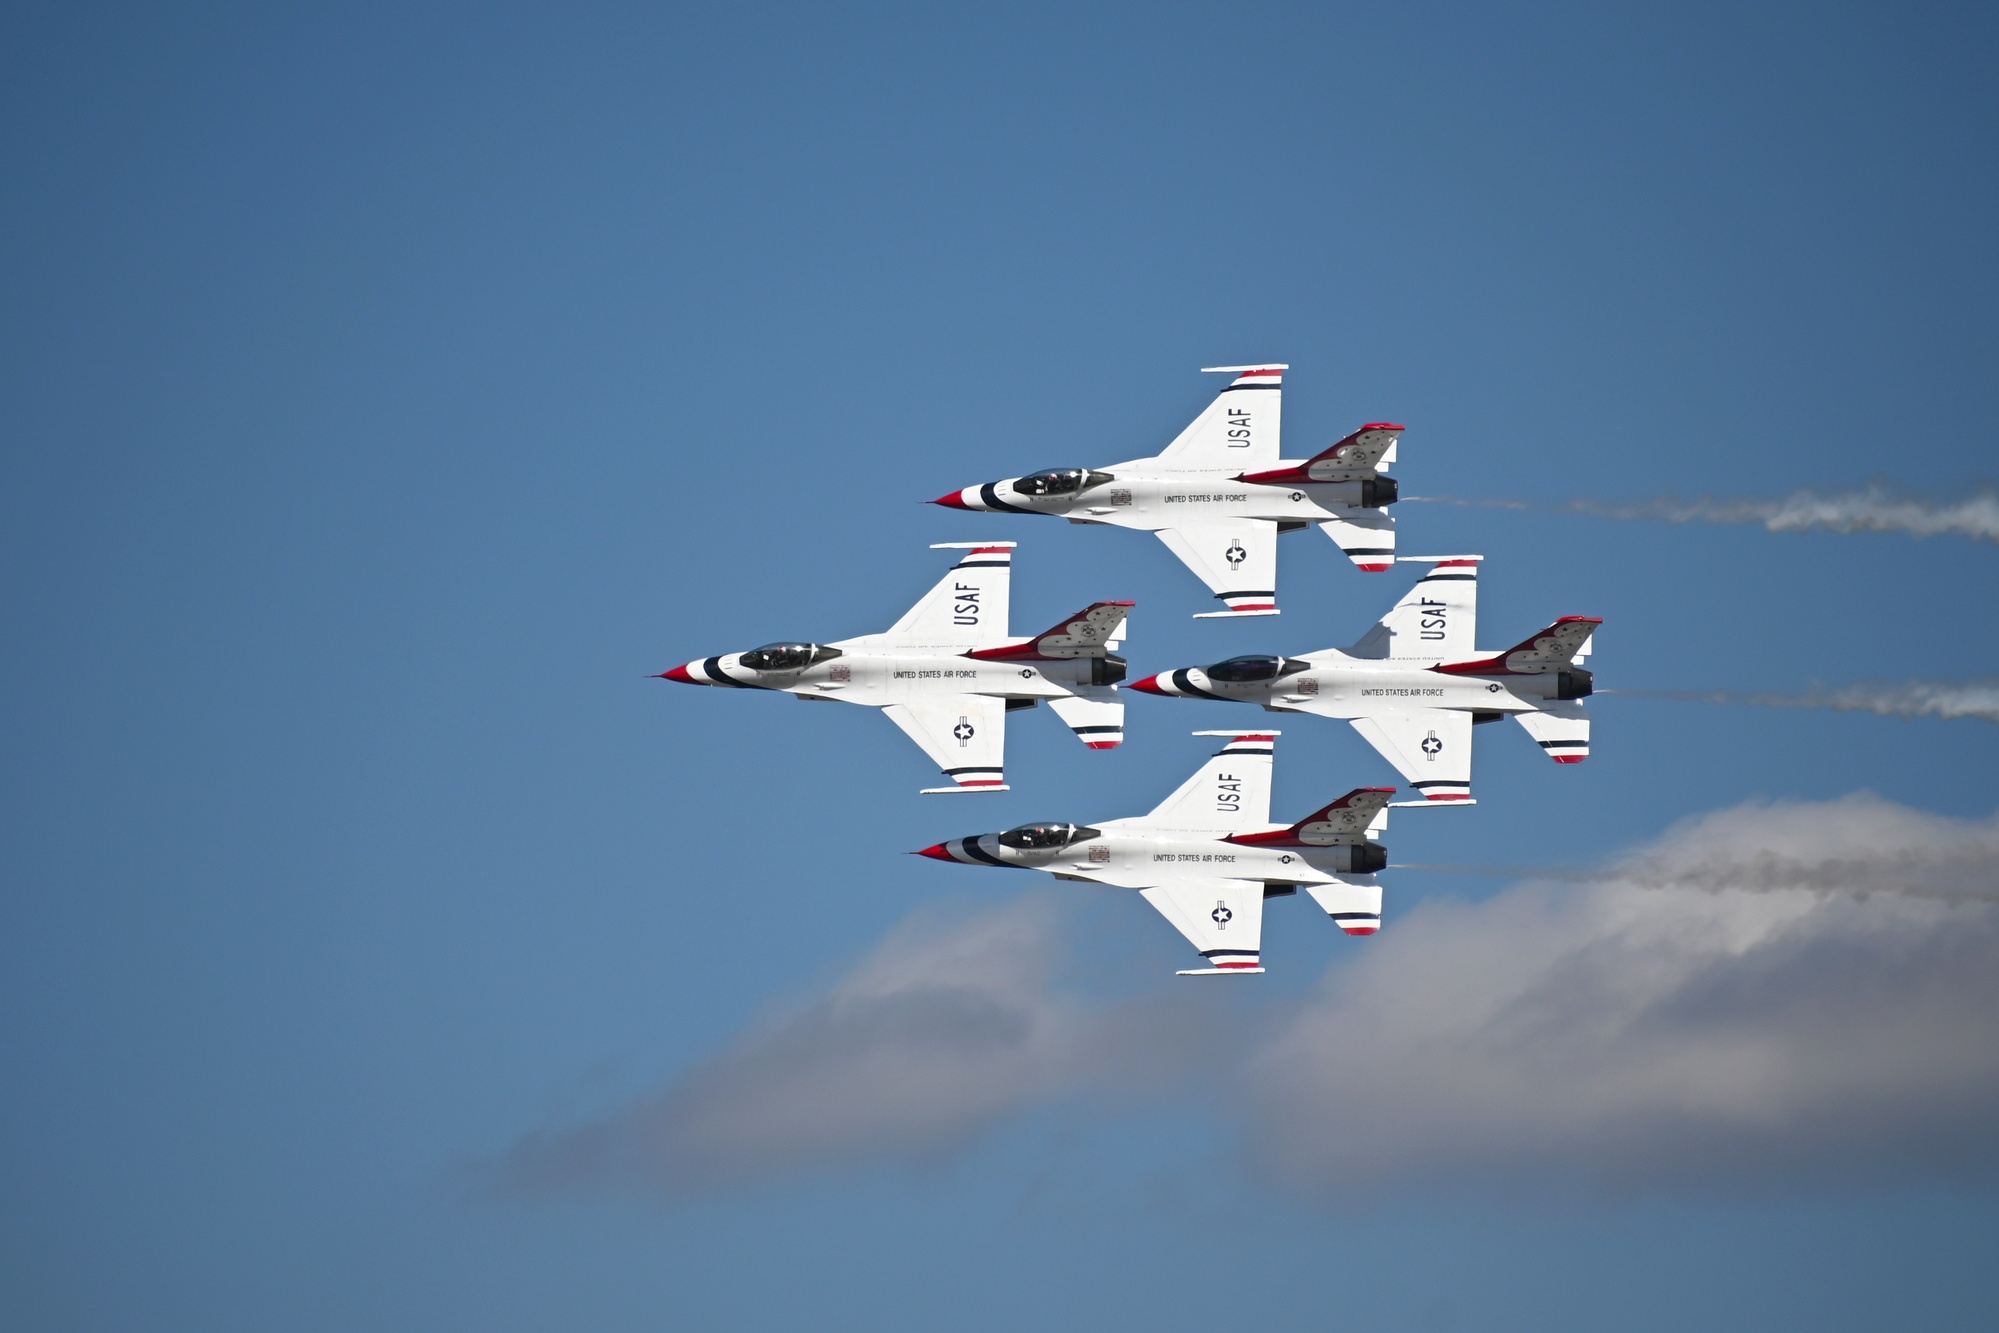 DVIDS - Images - Thunderbird four-ship formation [Image 1 of 10]